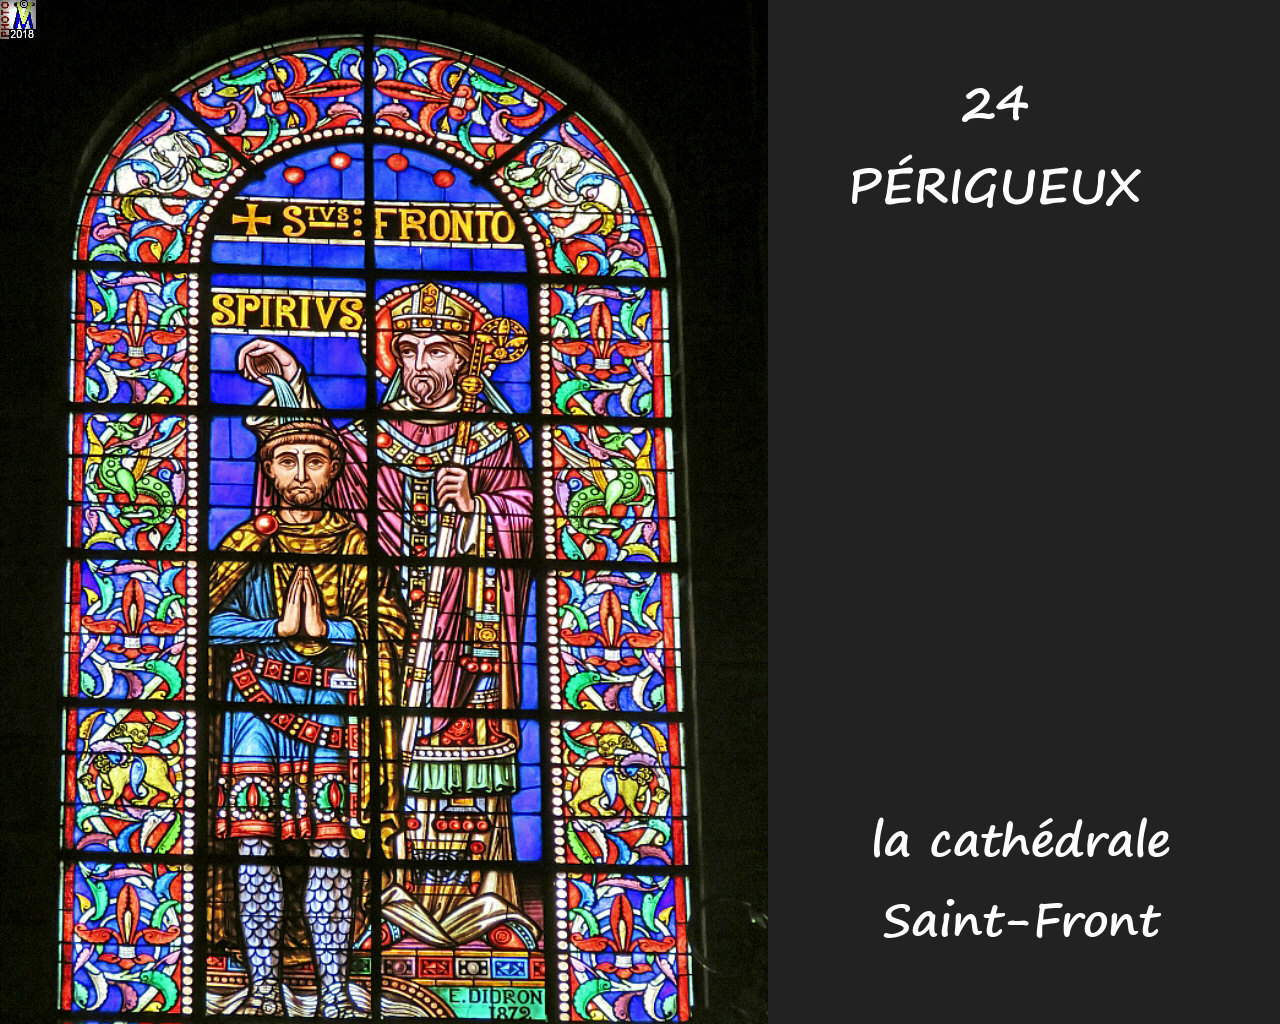 24PERIGUEUX_cathedrale_1148.jpg